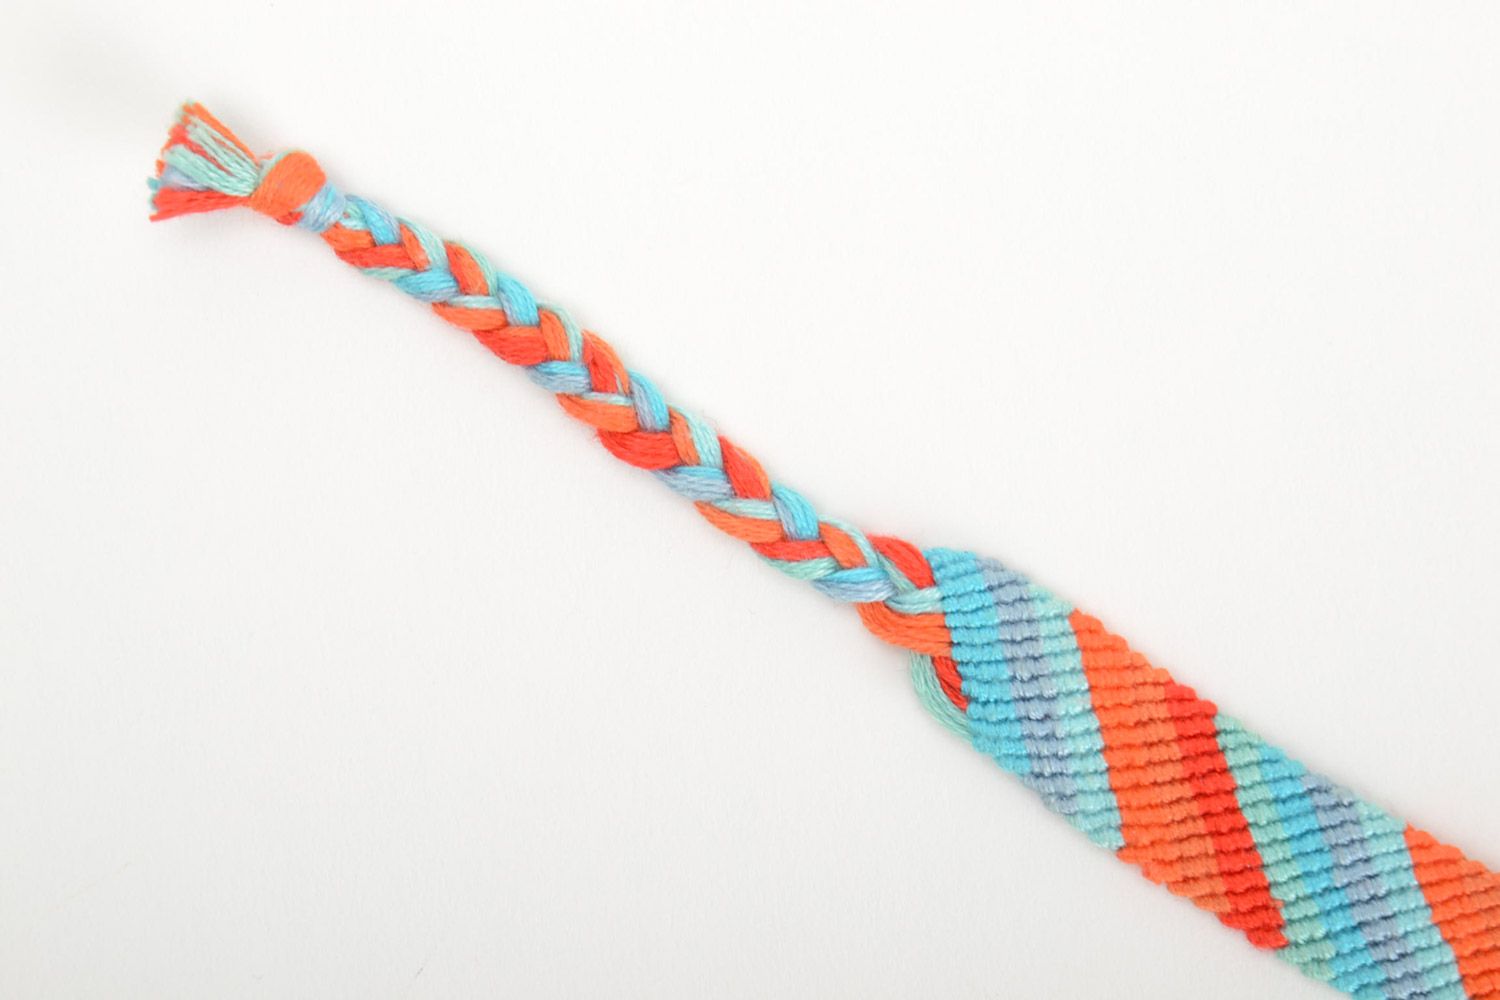 Handmade striped friendship bracelet woven of orange and blue embroidery floss photo 4